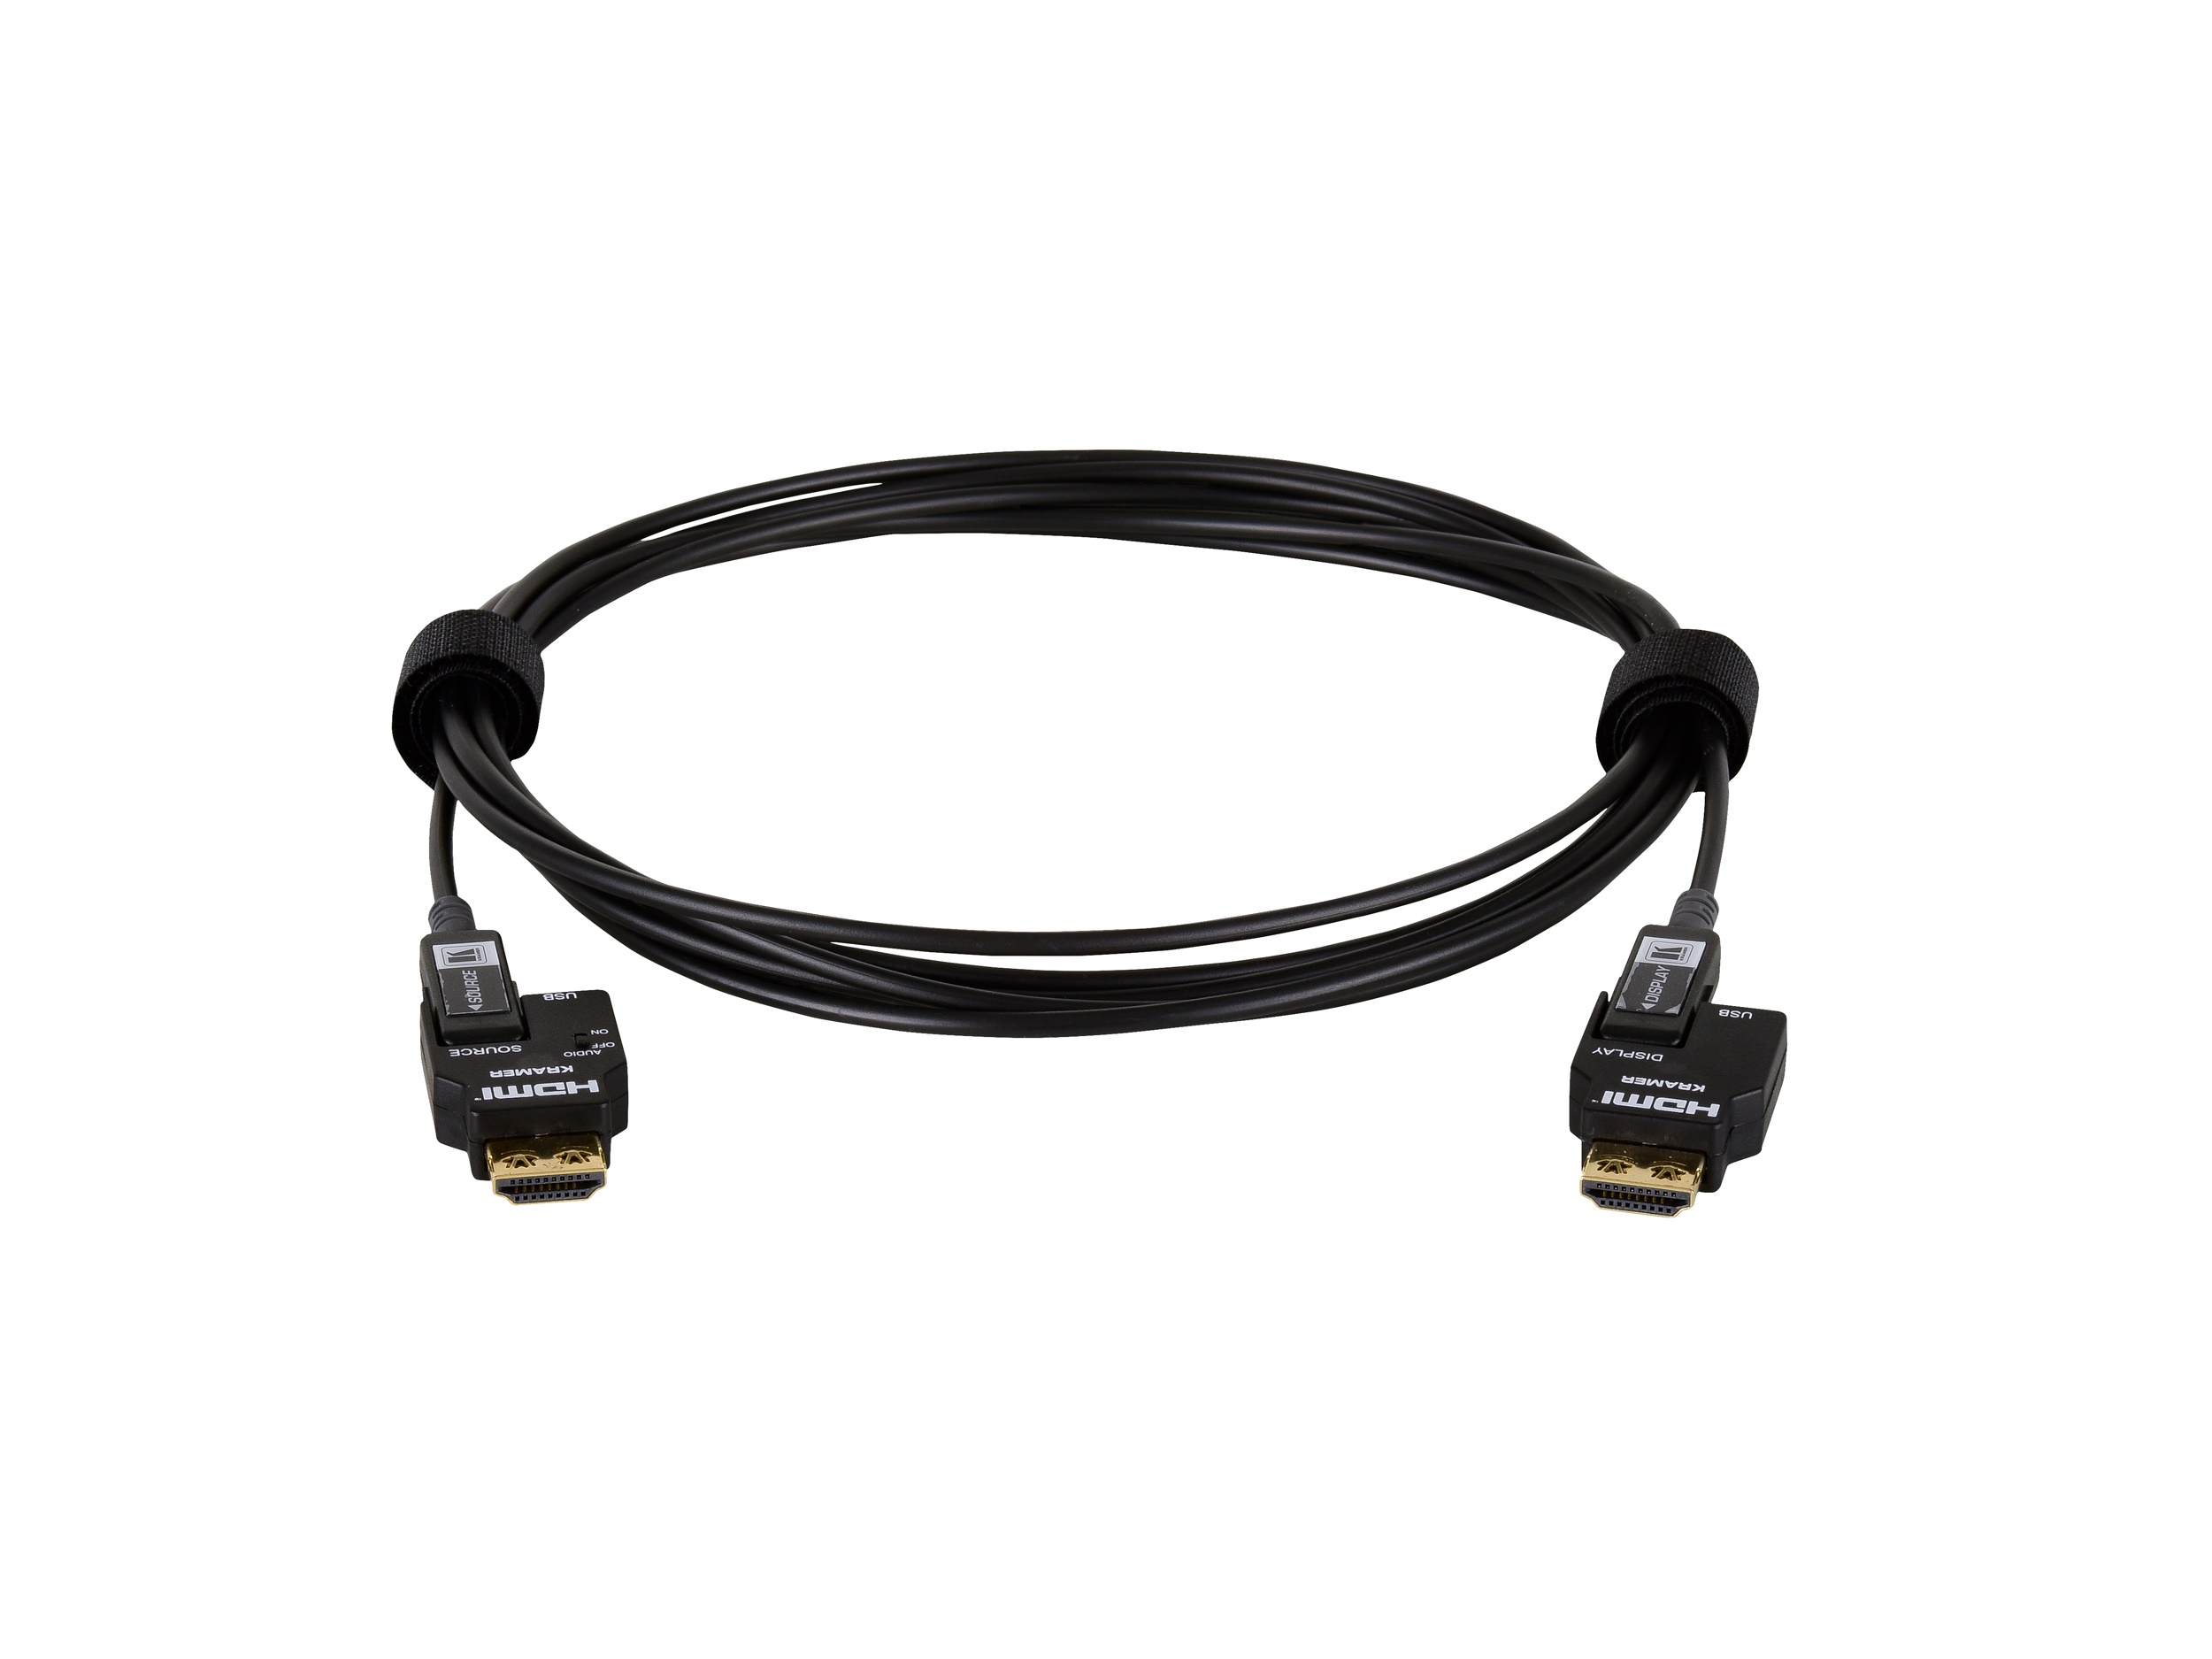 CRS-FIBERH-S1-23 7m/23ft 4K/60Hz (4x2x0) Secured Unidirectional 4K Pluggable HDMI Cable over Pure Fiber Cable by Kramer